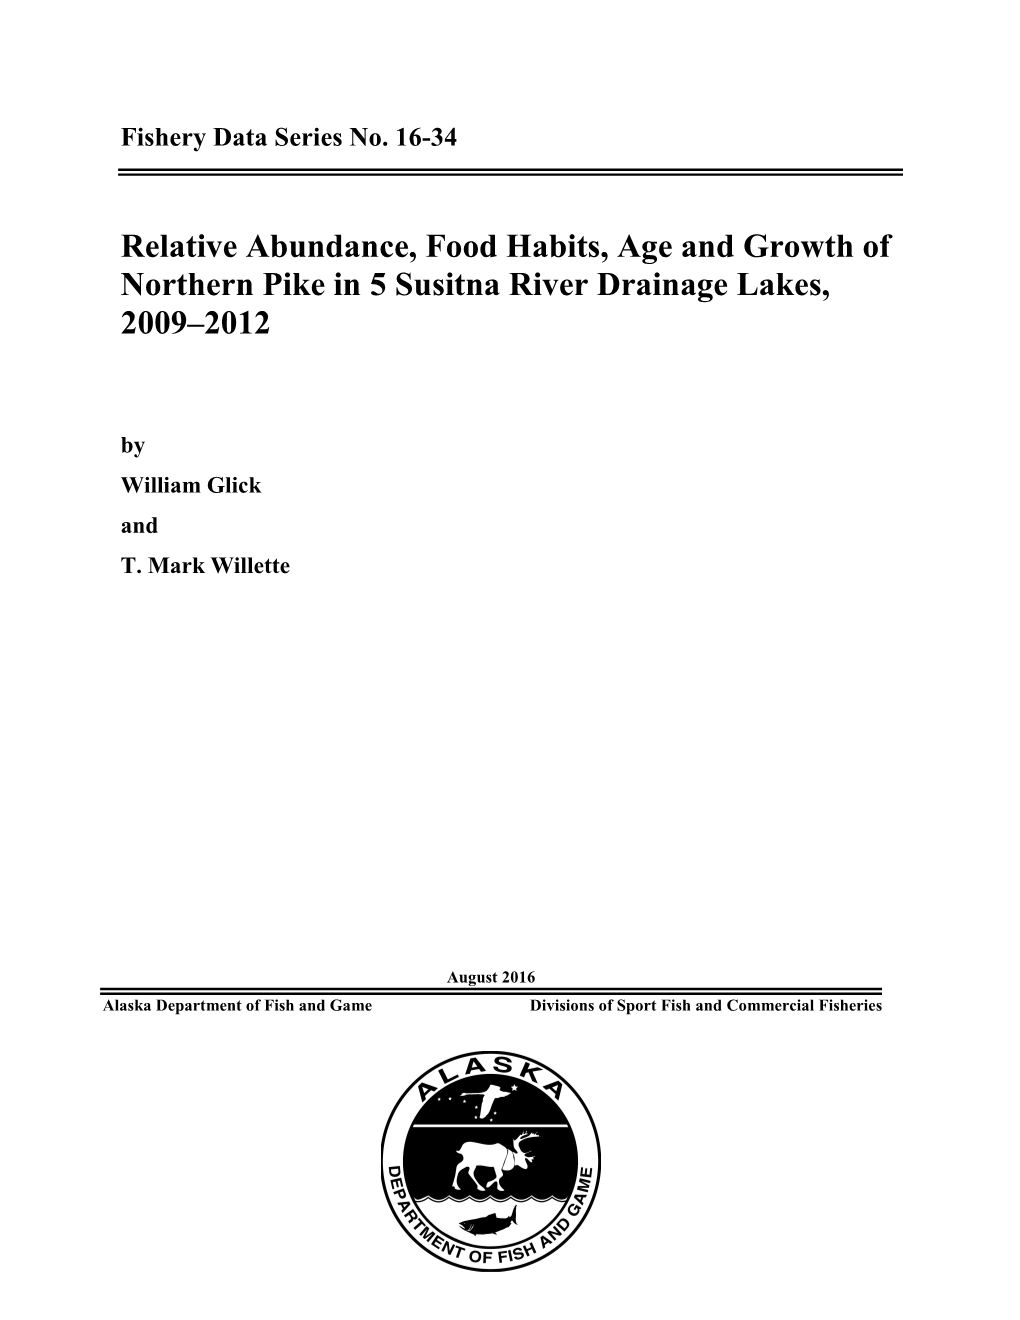 Relative Abundance, Food Habits, Age, and Growth of Northern Pike in 5 Susitna River Drainage Lakes, 2009–2012